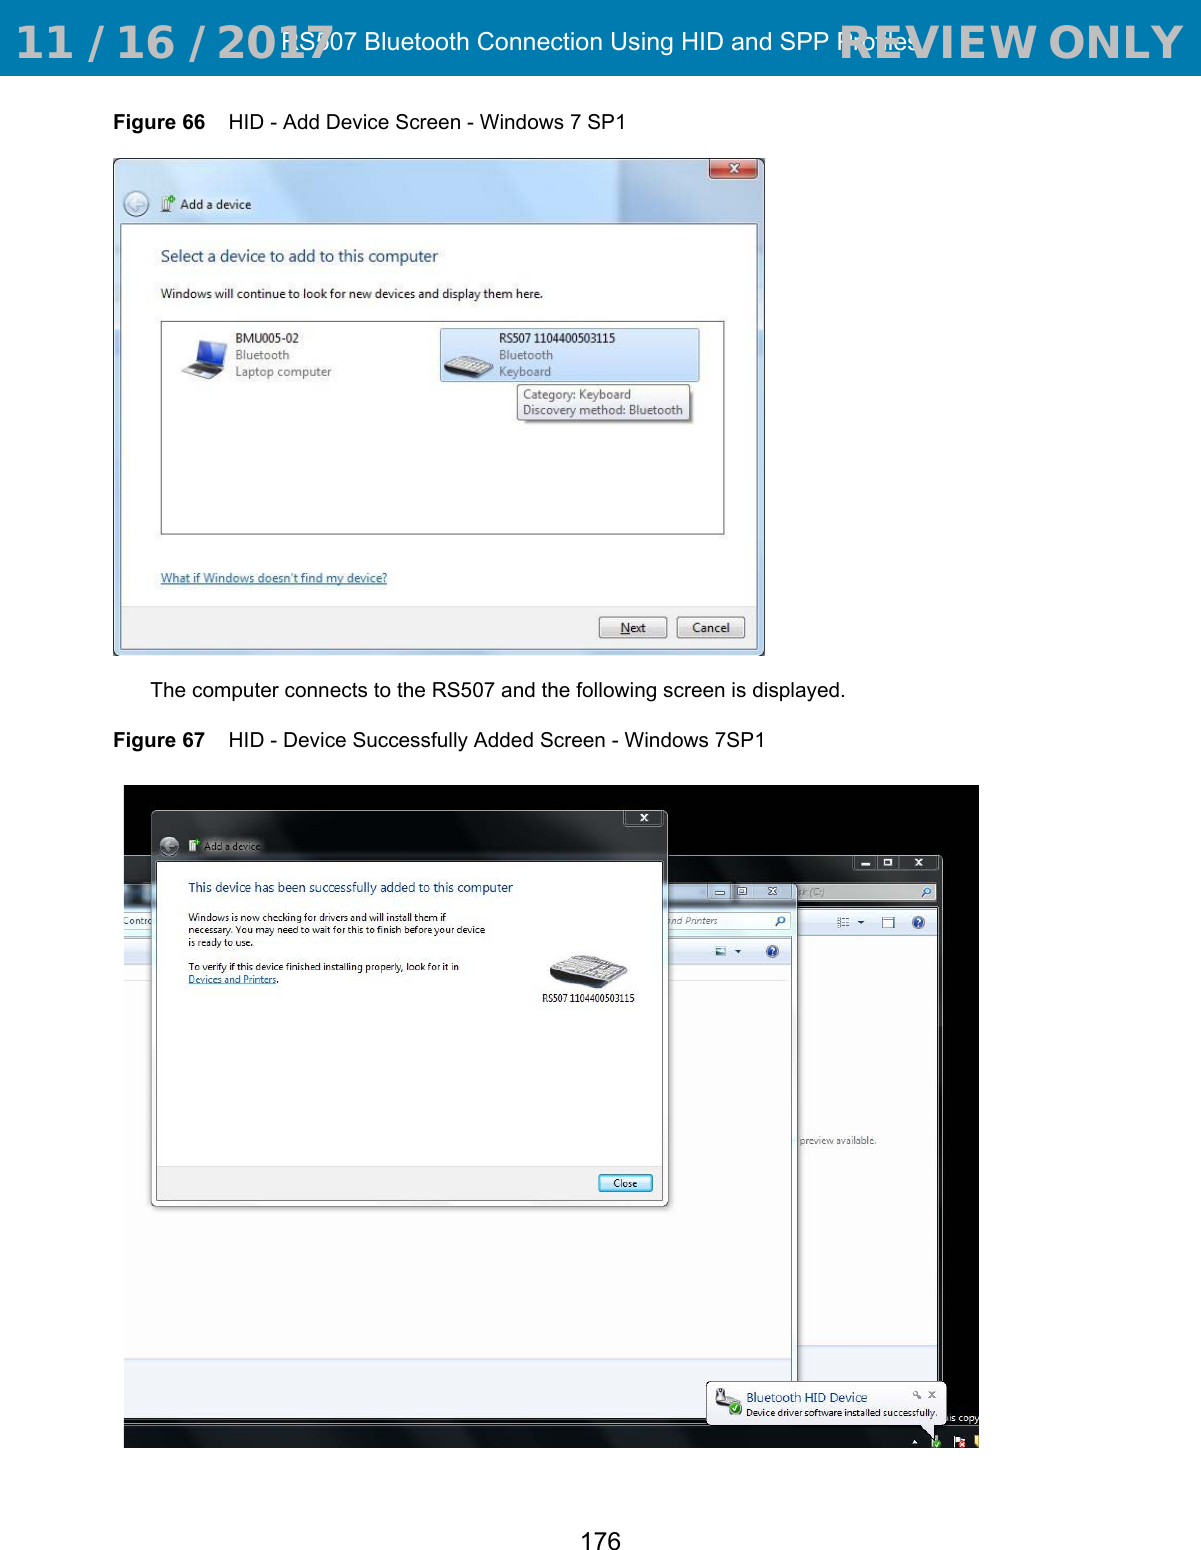 RS507 Bluetooth Connection Using HID and SPP Profiles176Figure 66    HID - Add Device Screen - Windows 7 SP1The computer connects to the RS507 and the following screen is displayed.Figure 67    HID - Device Successfully Added Screen - Windows 7SP1 11 / 16 / 2017                                  REVIEW ONLY                             REVIEW ONLY - REVIEW ONLY - REVIEW ONLY